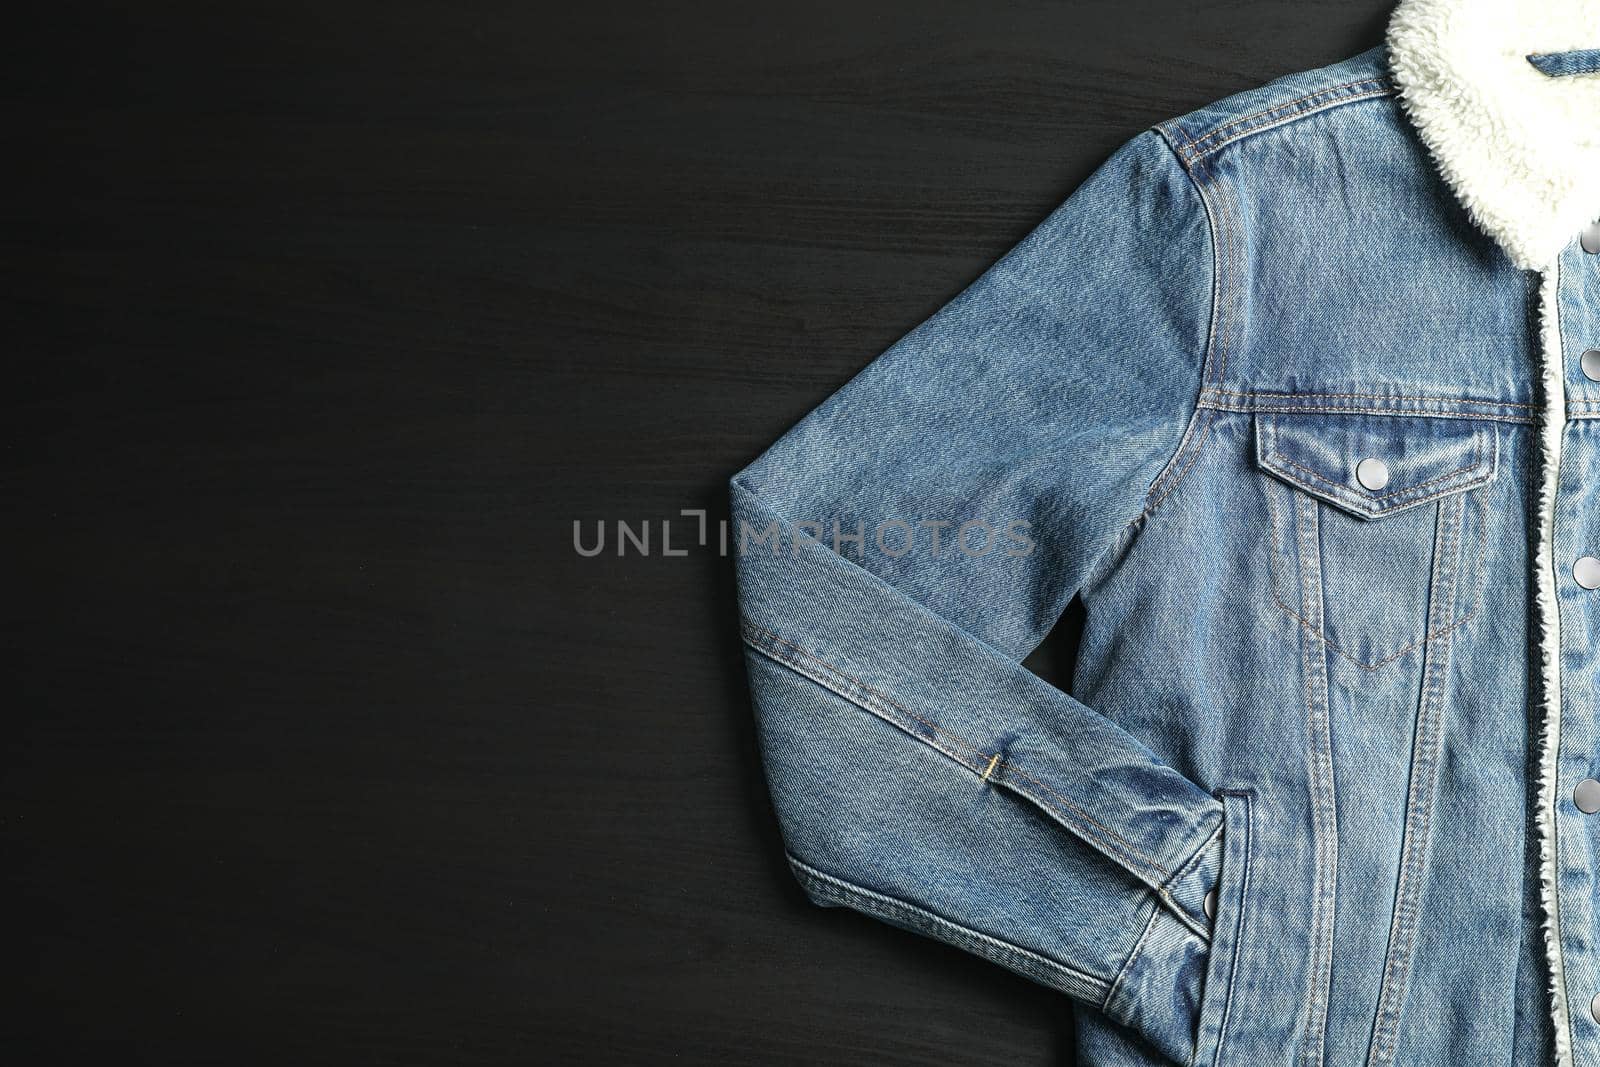 Denim jacket on black background, space for text by AtlasCompany